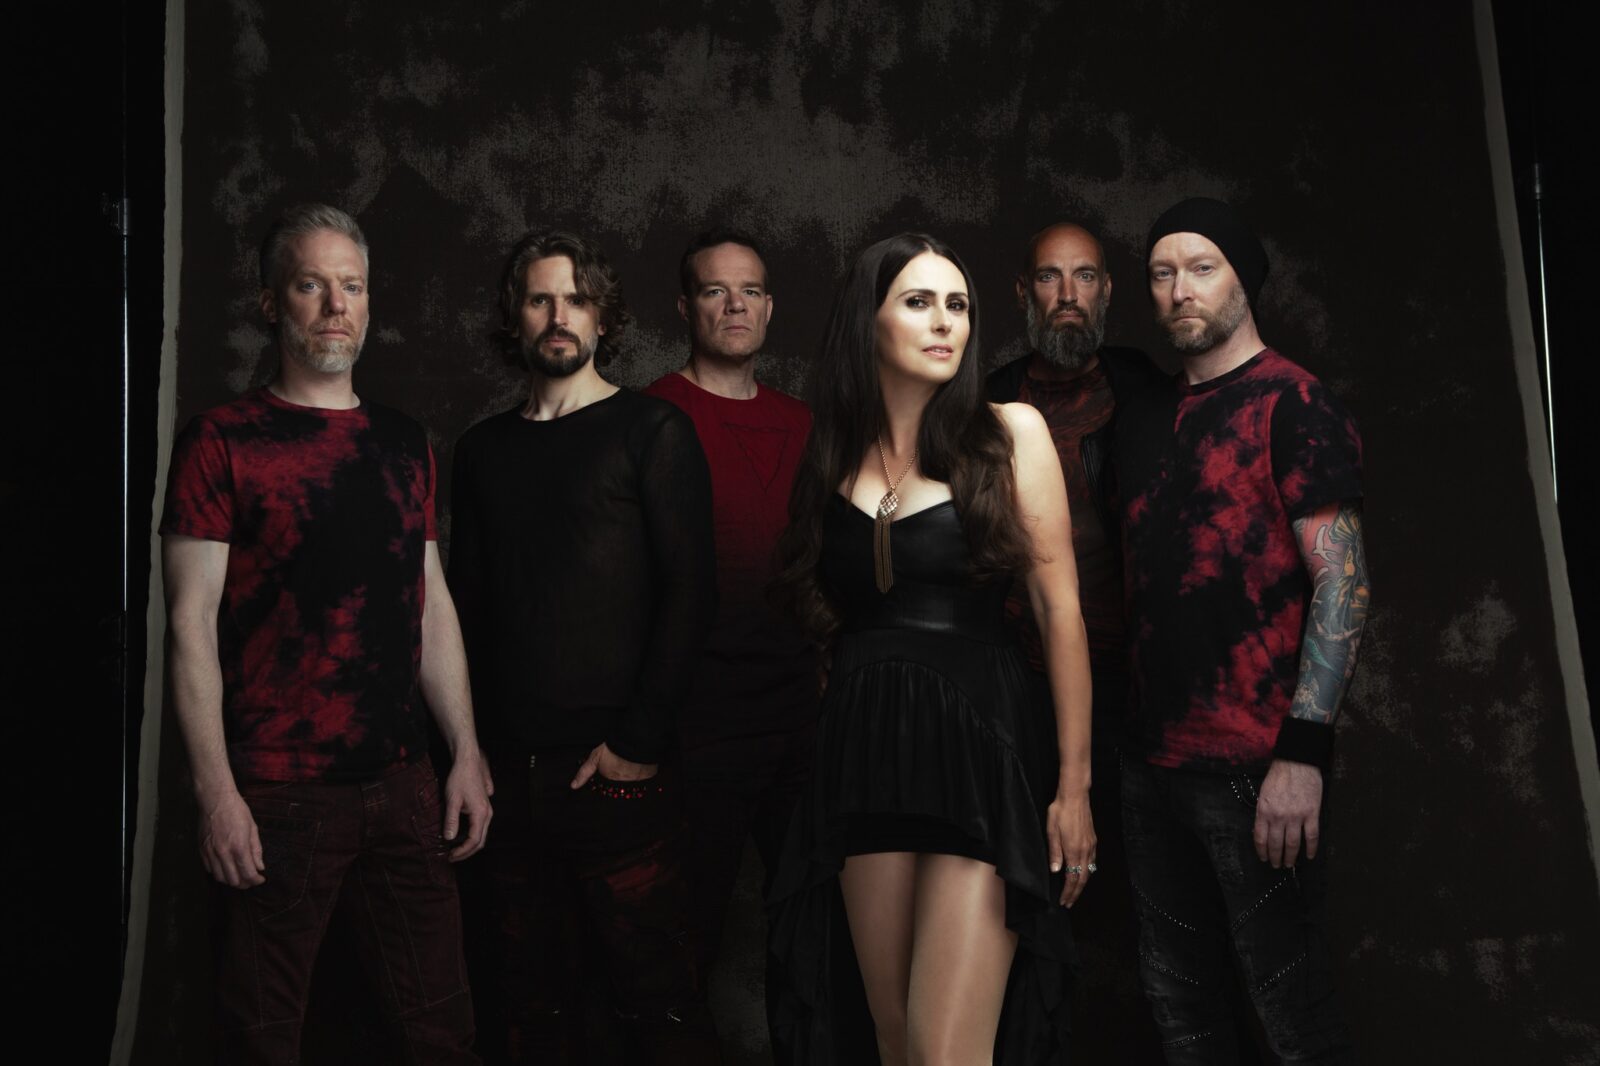 within temptation tour 2022 song list